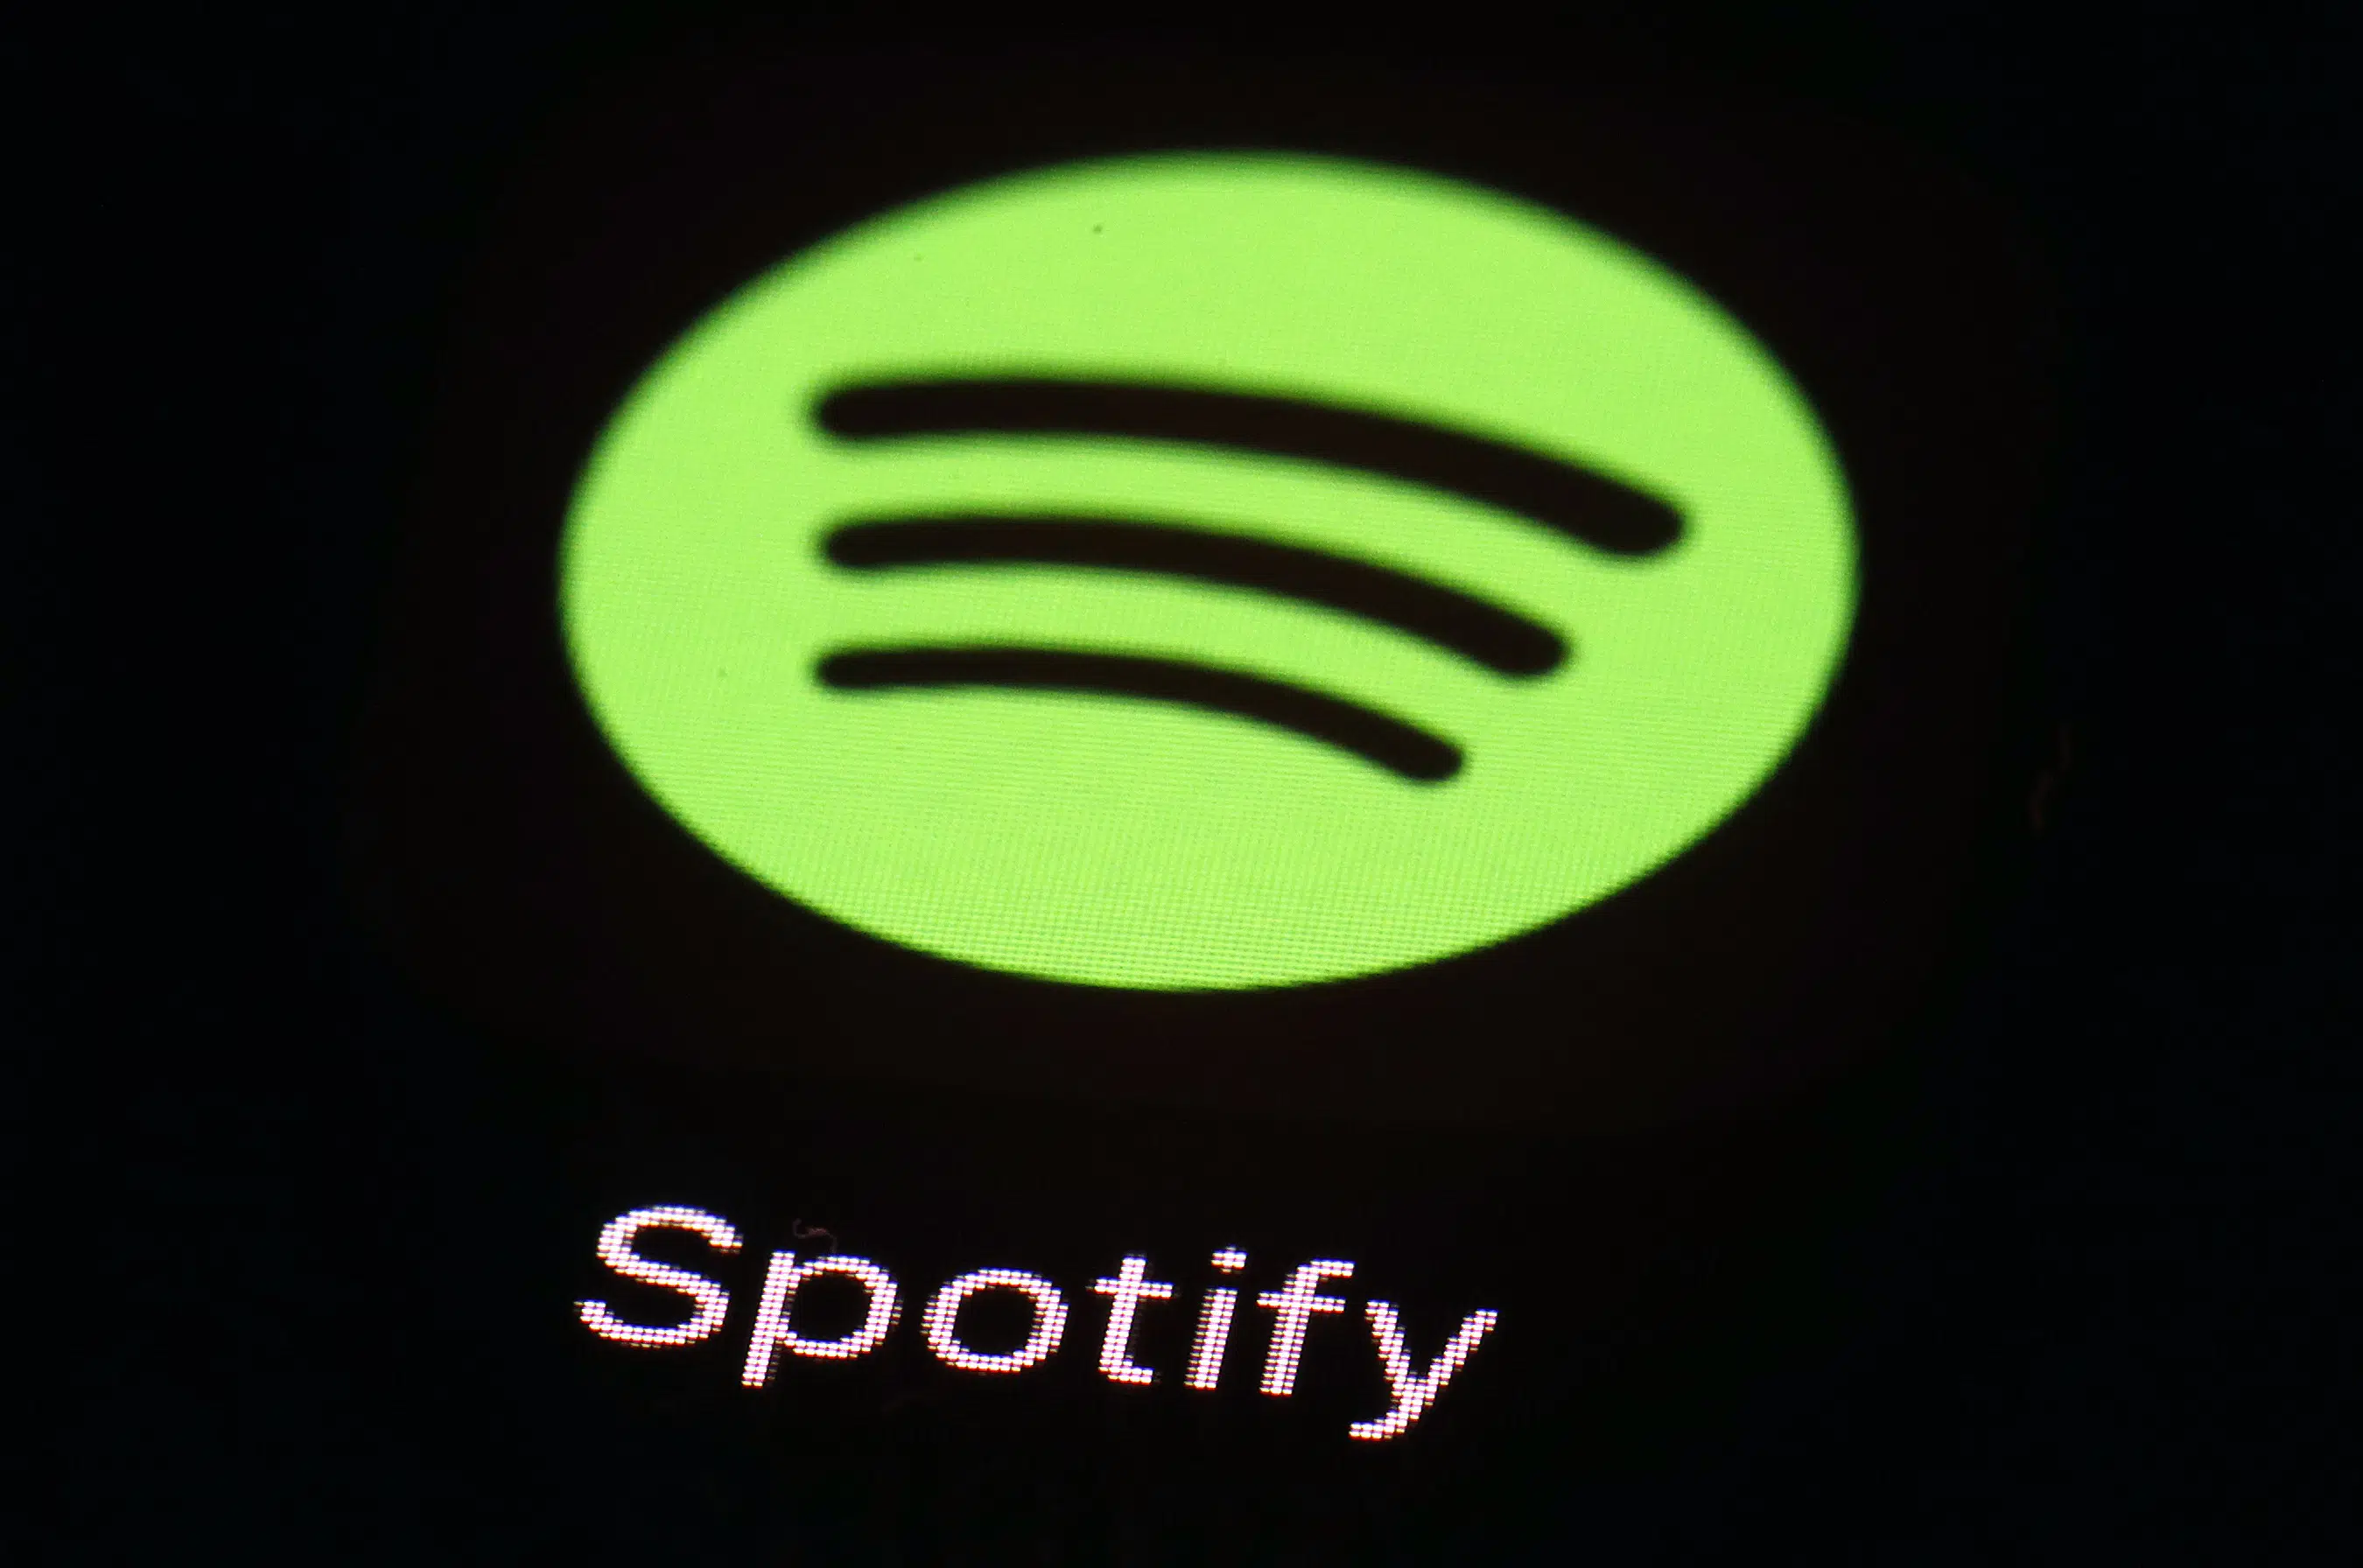 LONDON (AP) — Music streaming service Spotify said Monday it’s cutting 6% of its global workforce, or about 600 jobs, becoming yet another tech co